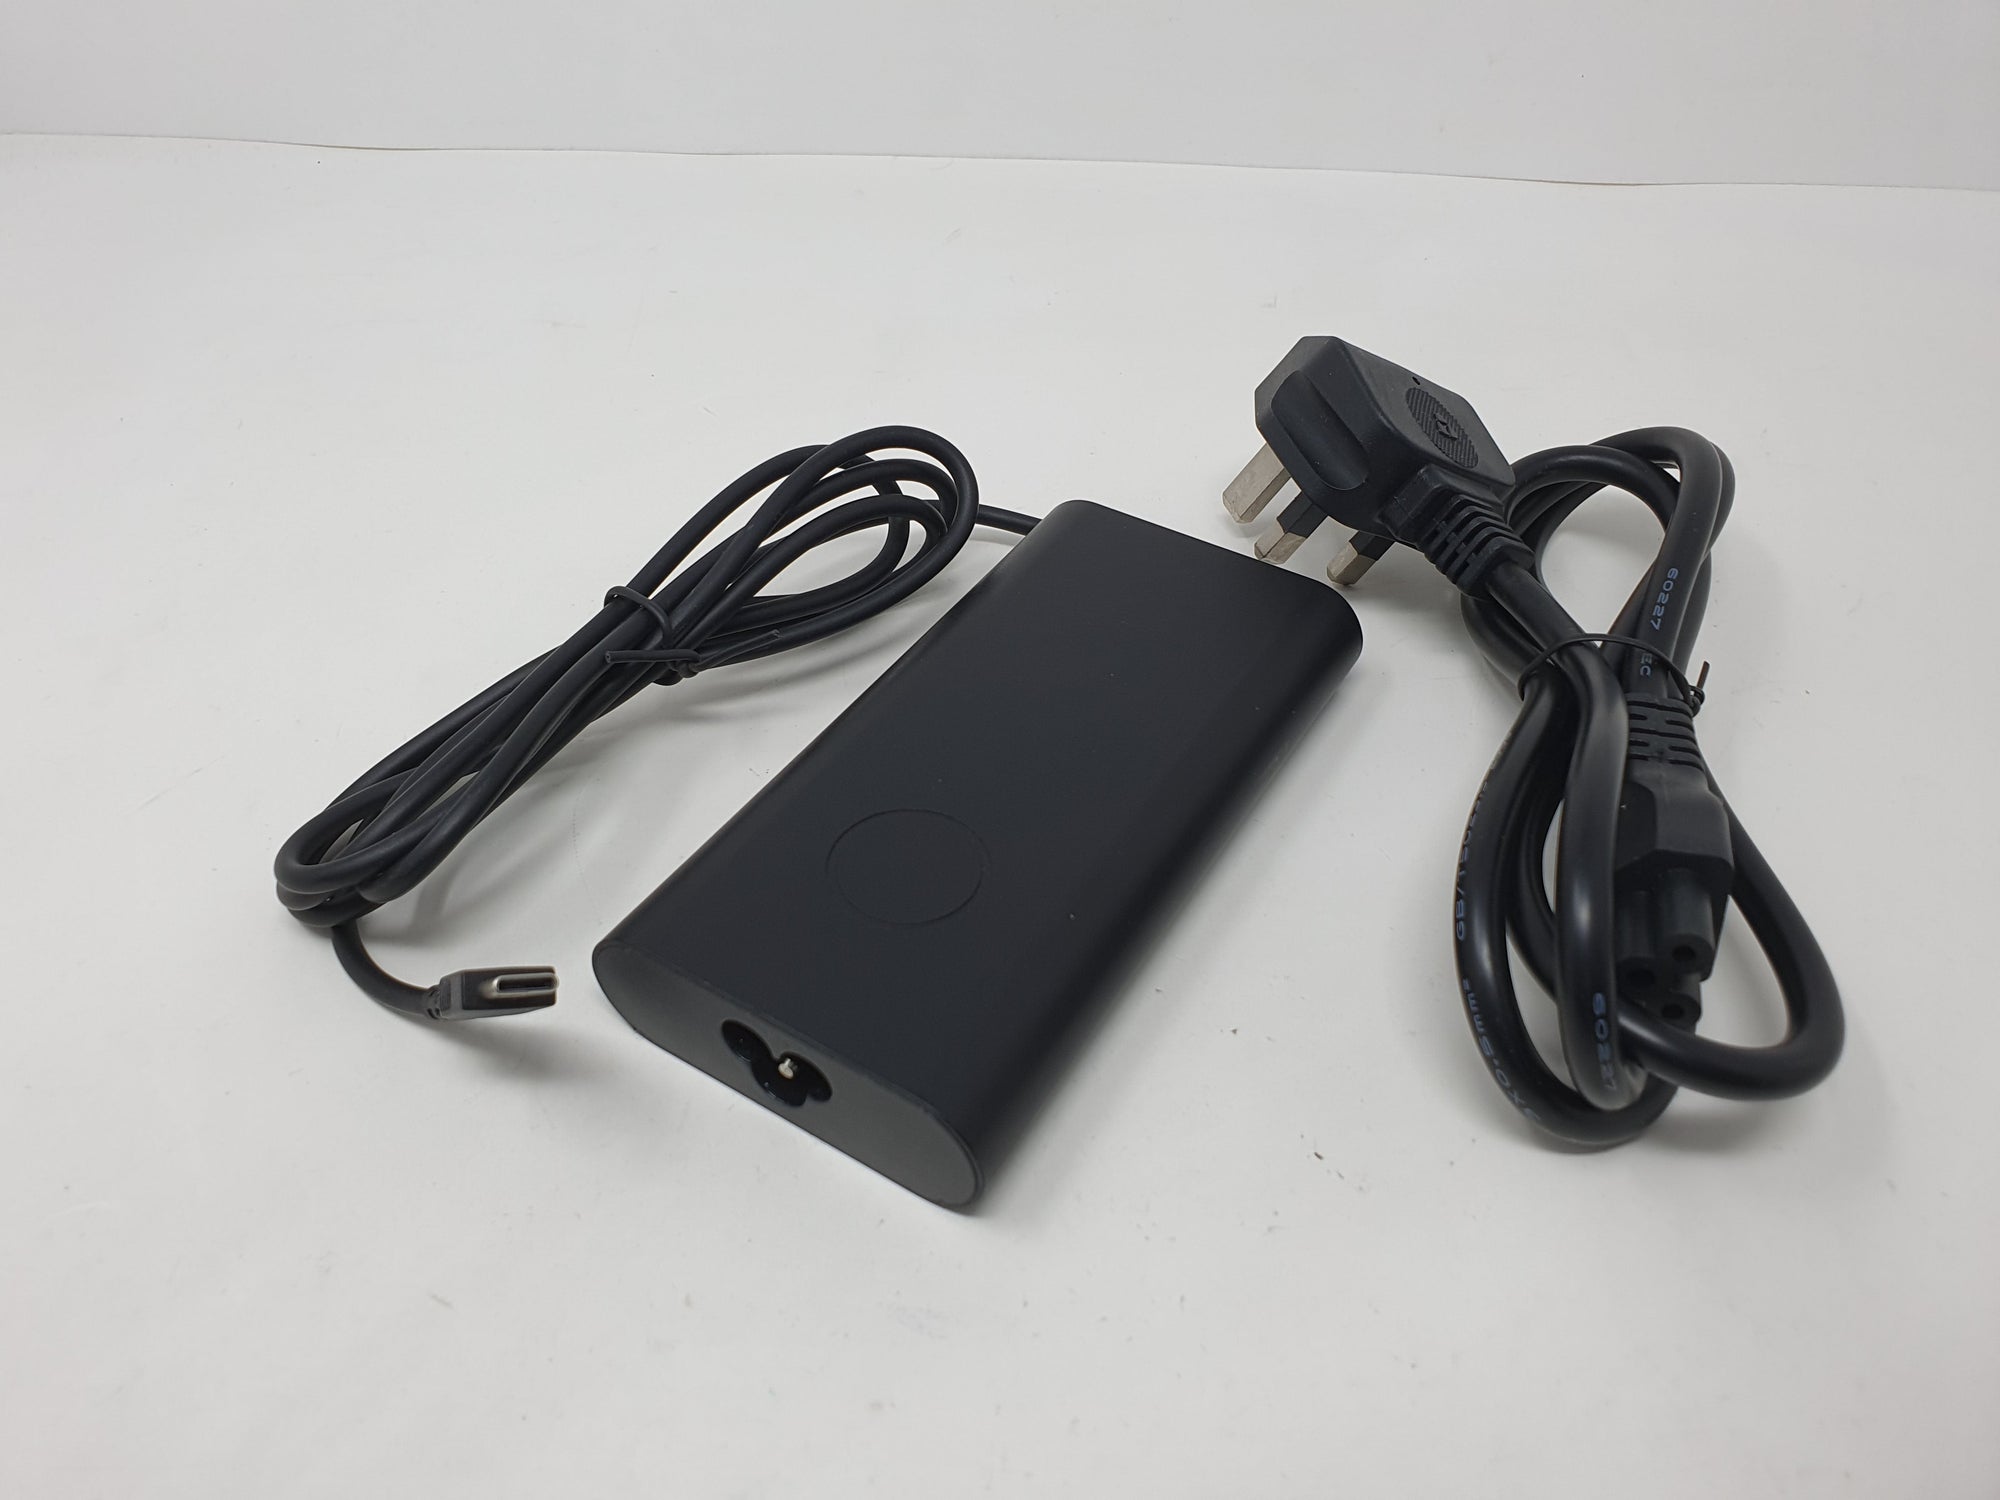 USB C Type-C Laptop Charger Power Supply Adapter for ASUS Laptop